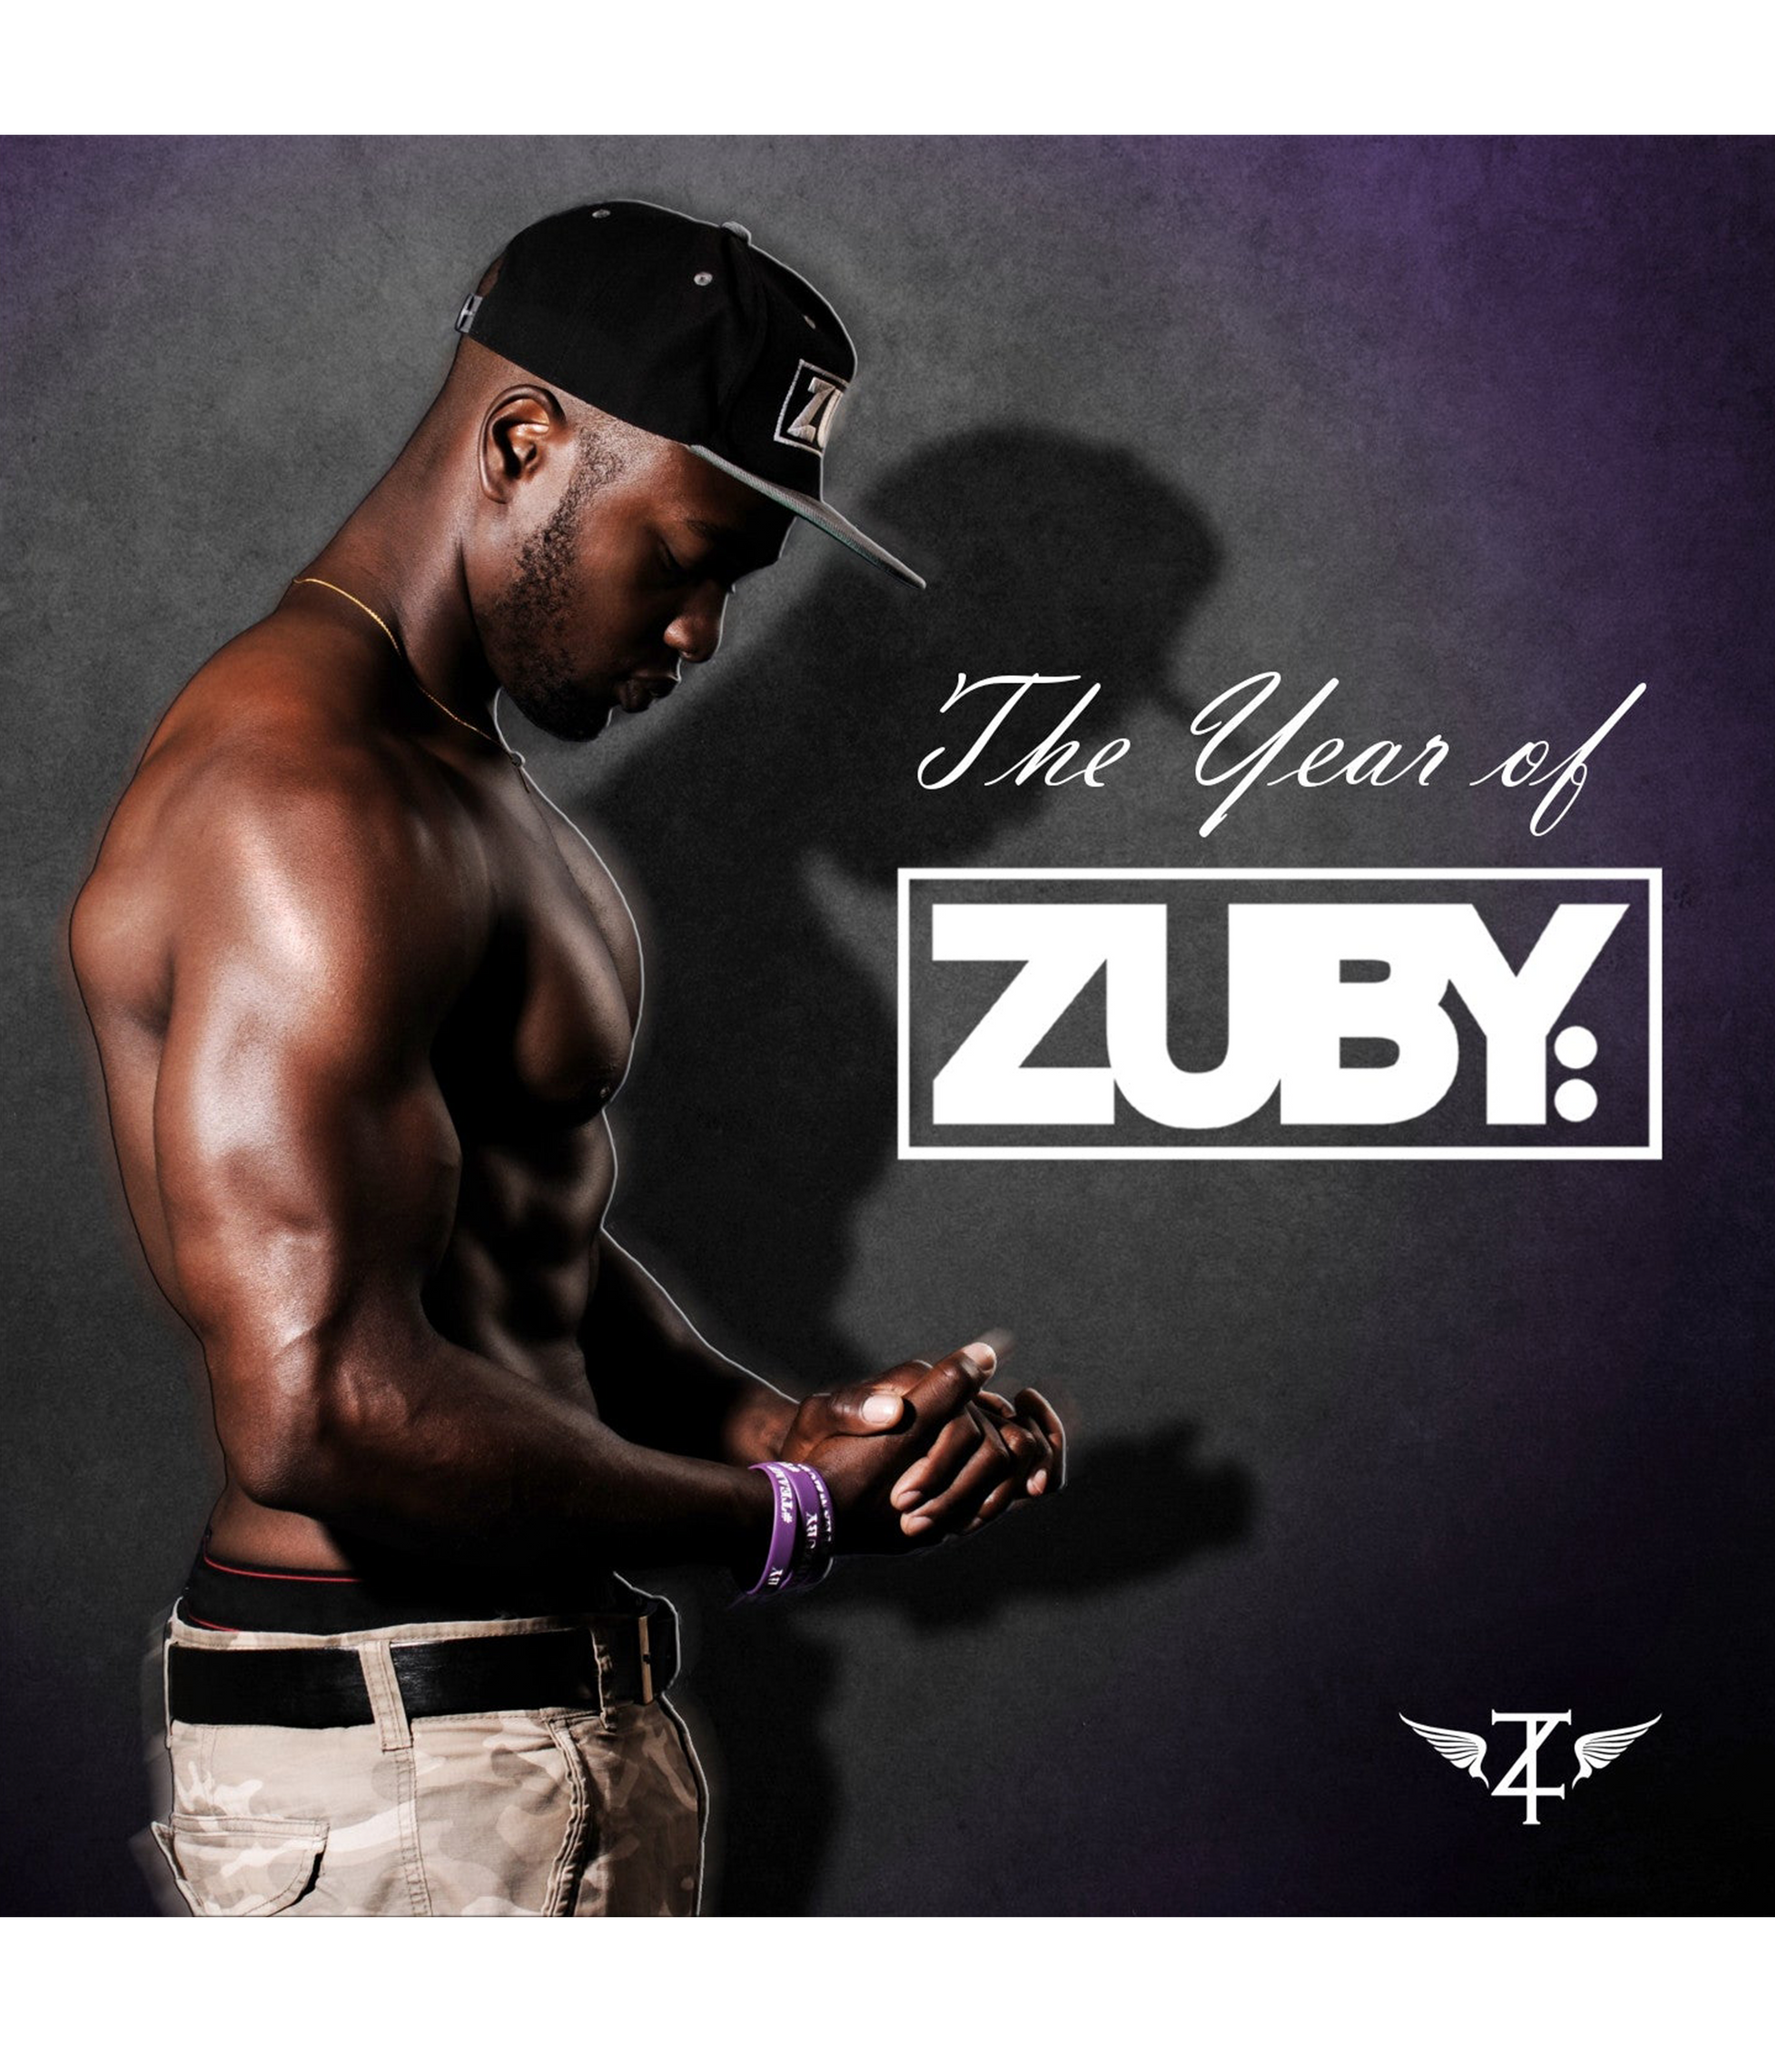 The Year of Zuby